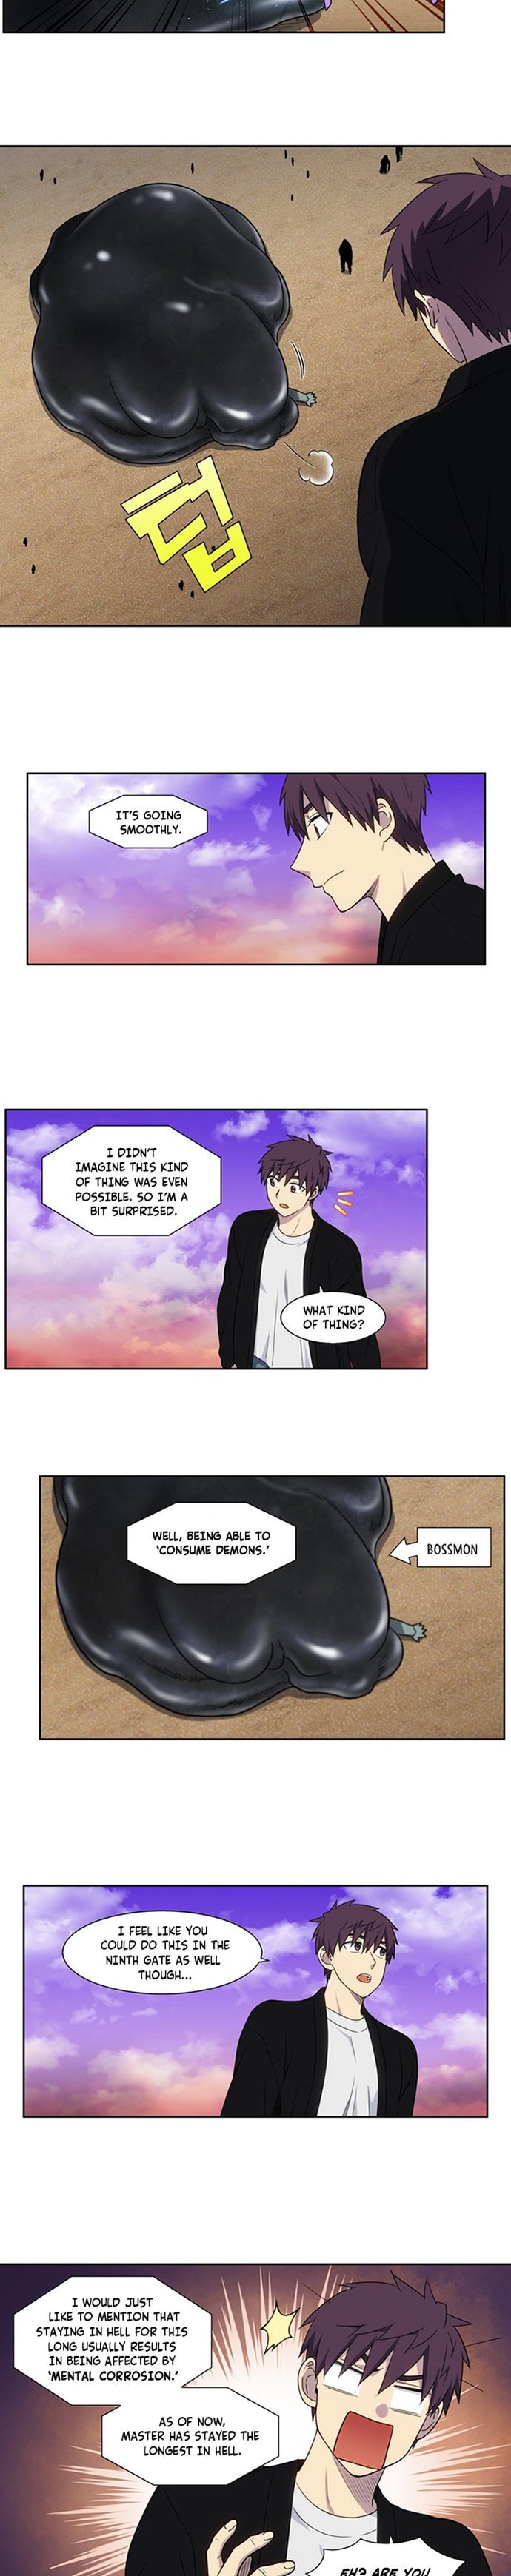 the-gamer-chap-404-8